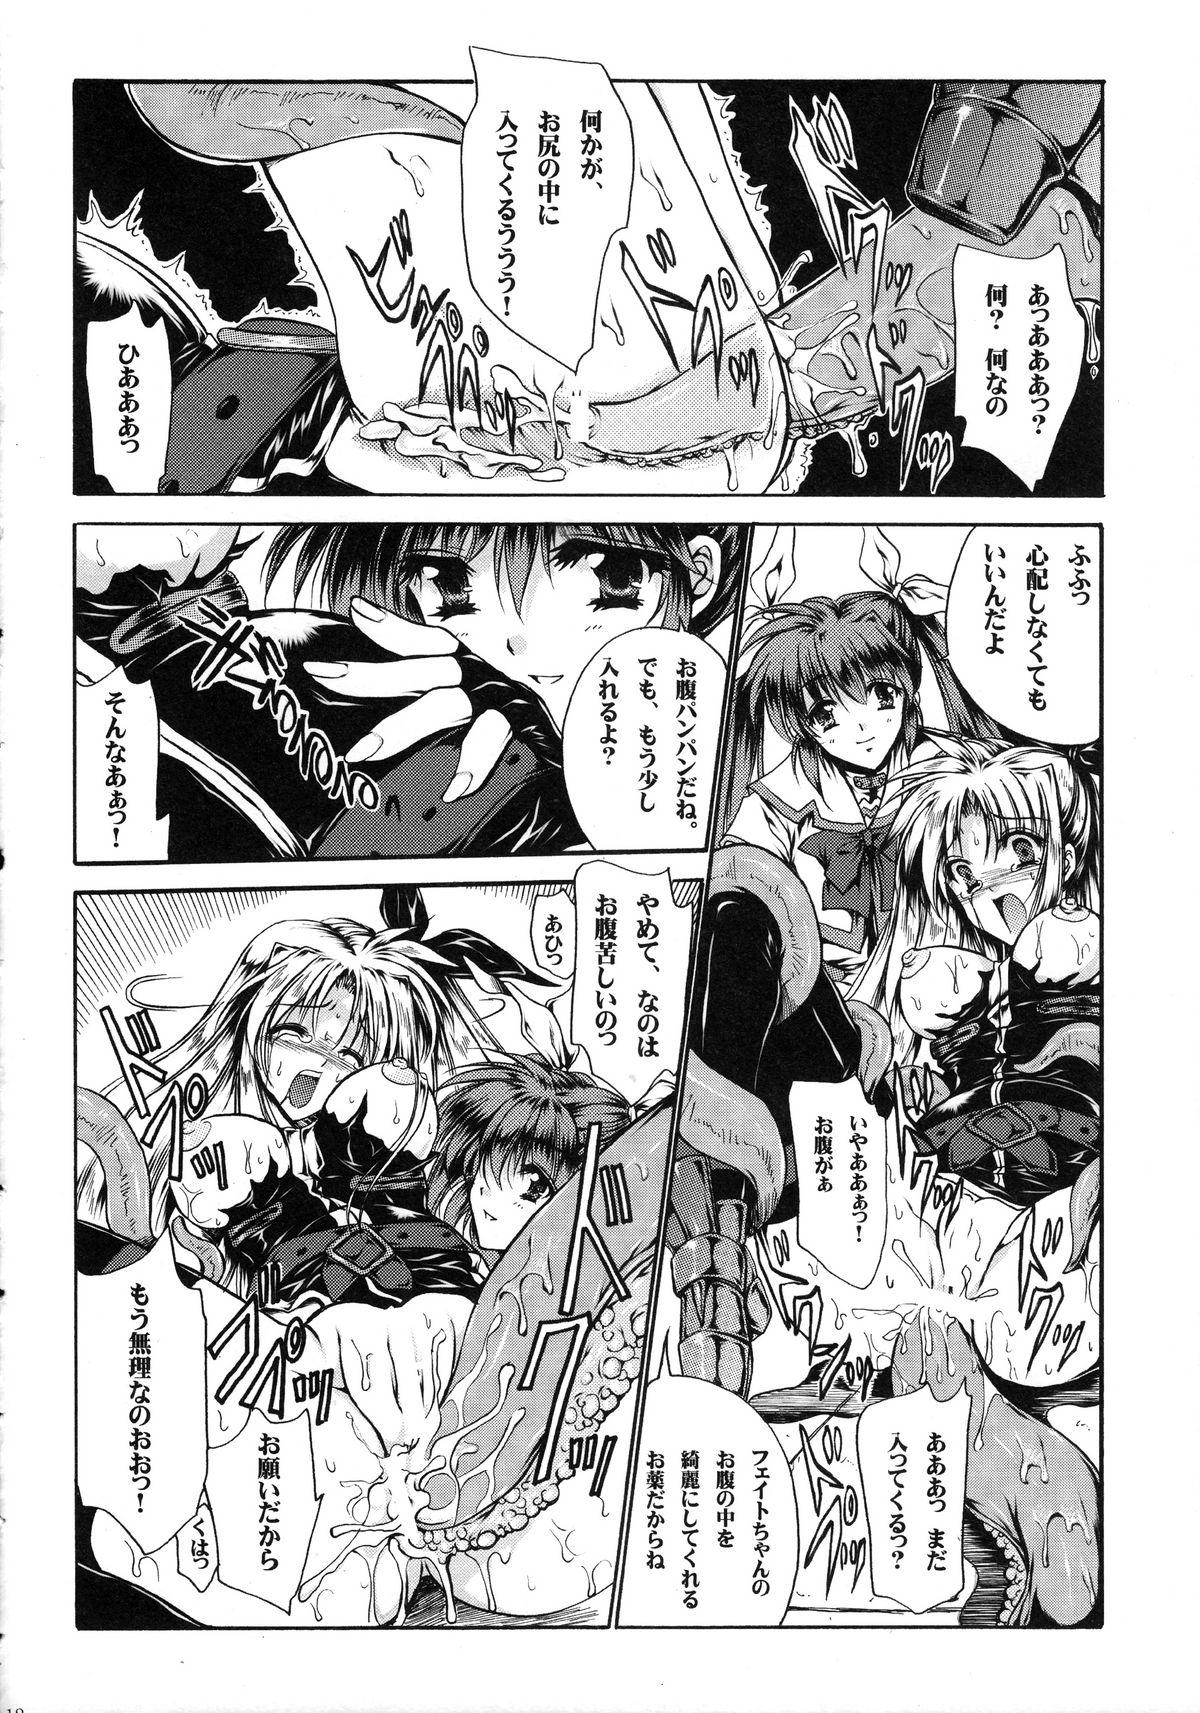 Asian Babes In Search Of Sanity - Mahou shoujo lyrical nanoha Infiel - Page 13